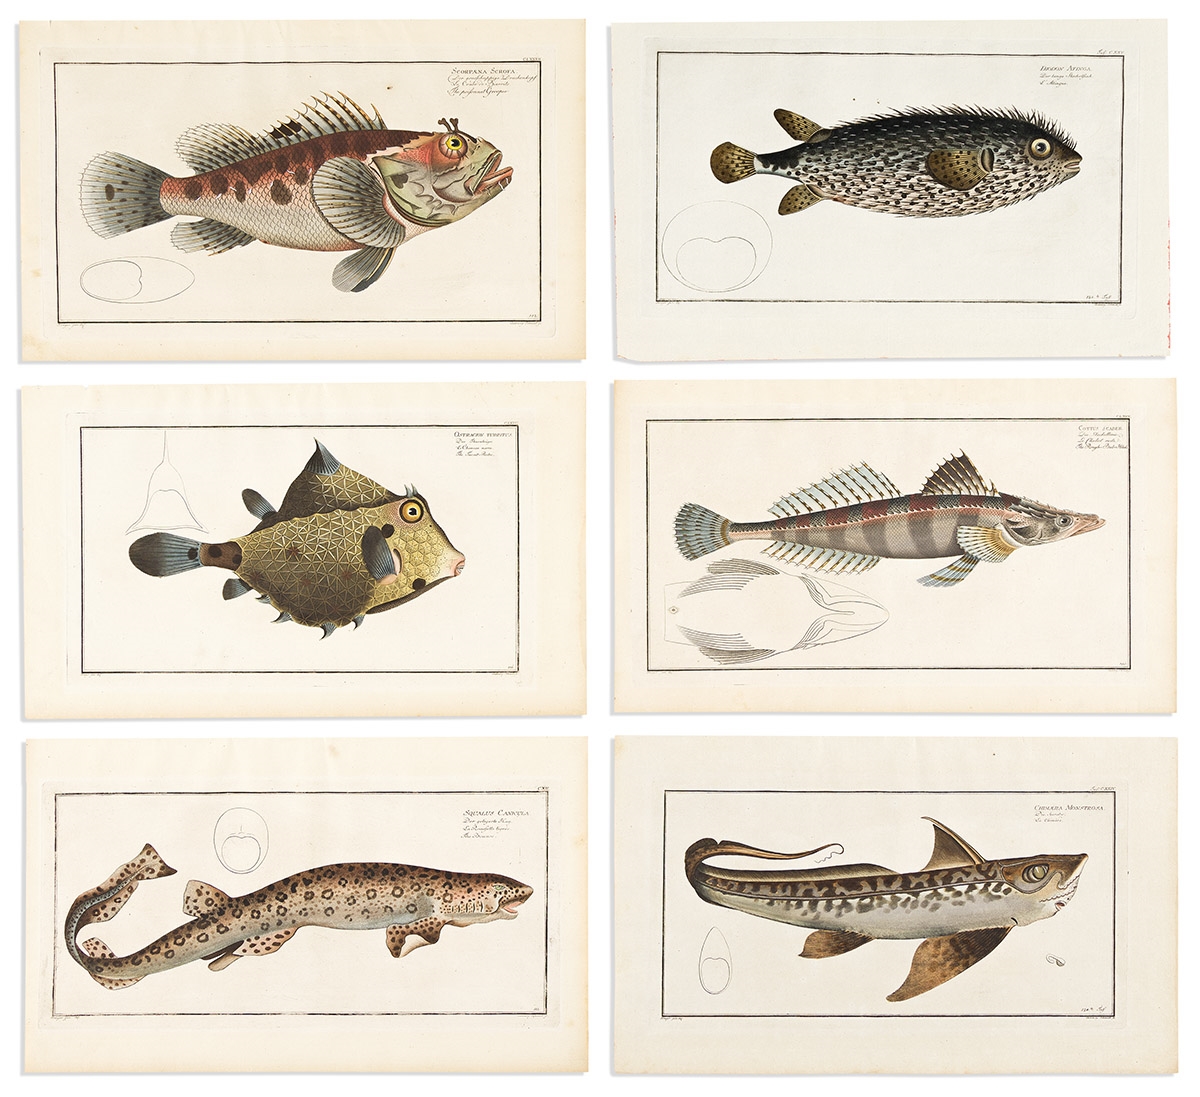 (FISH.) Marcus Elieser Bloch. Group of 6 hand-colored engraved plates from Bloch's Ichthyologie. by Marcus Elieser Bloch, circa 1790